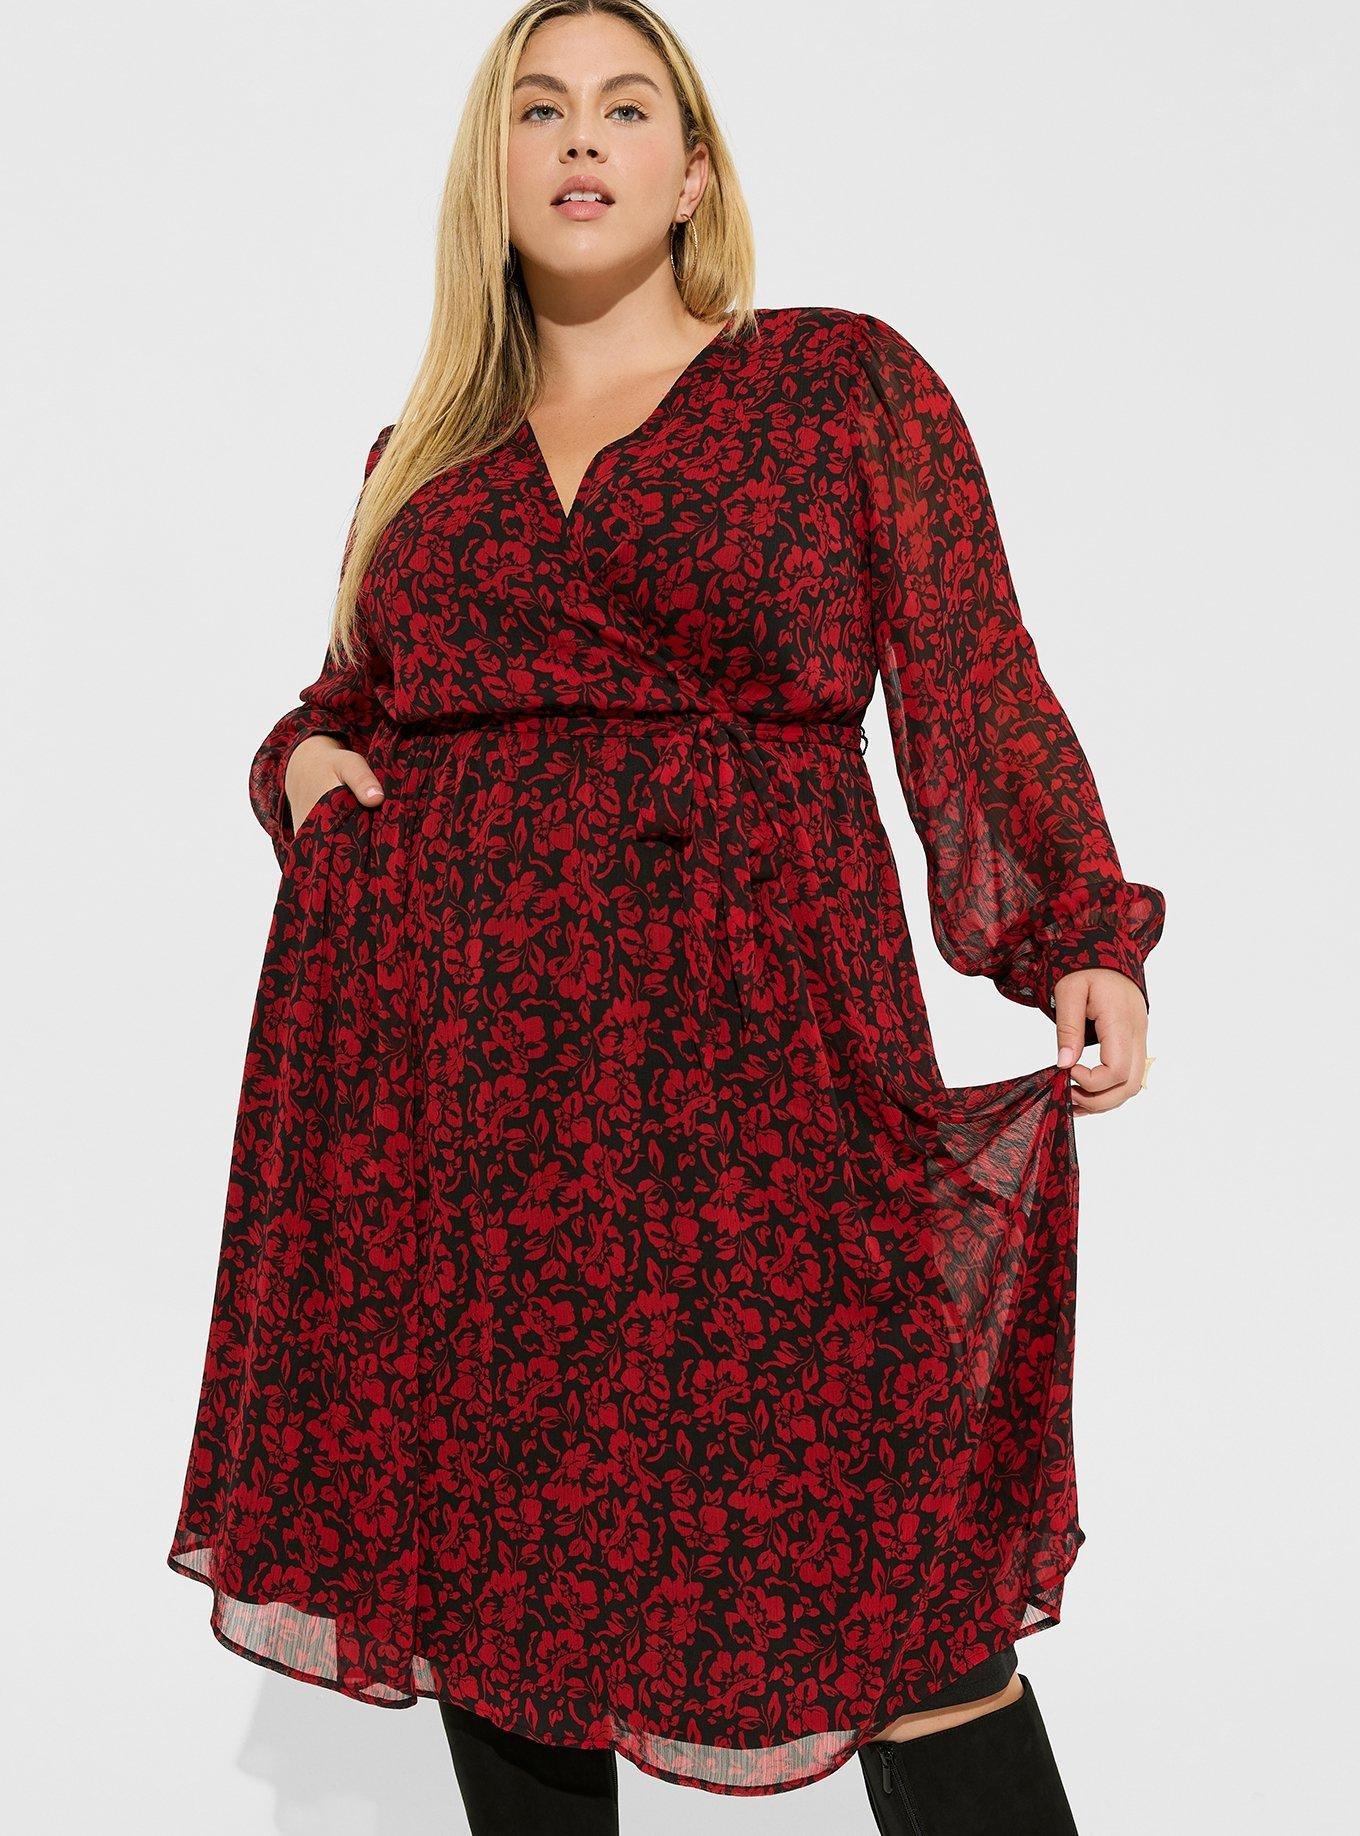 New Arrivals in Plus Size Dresses